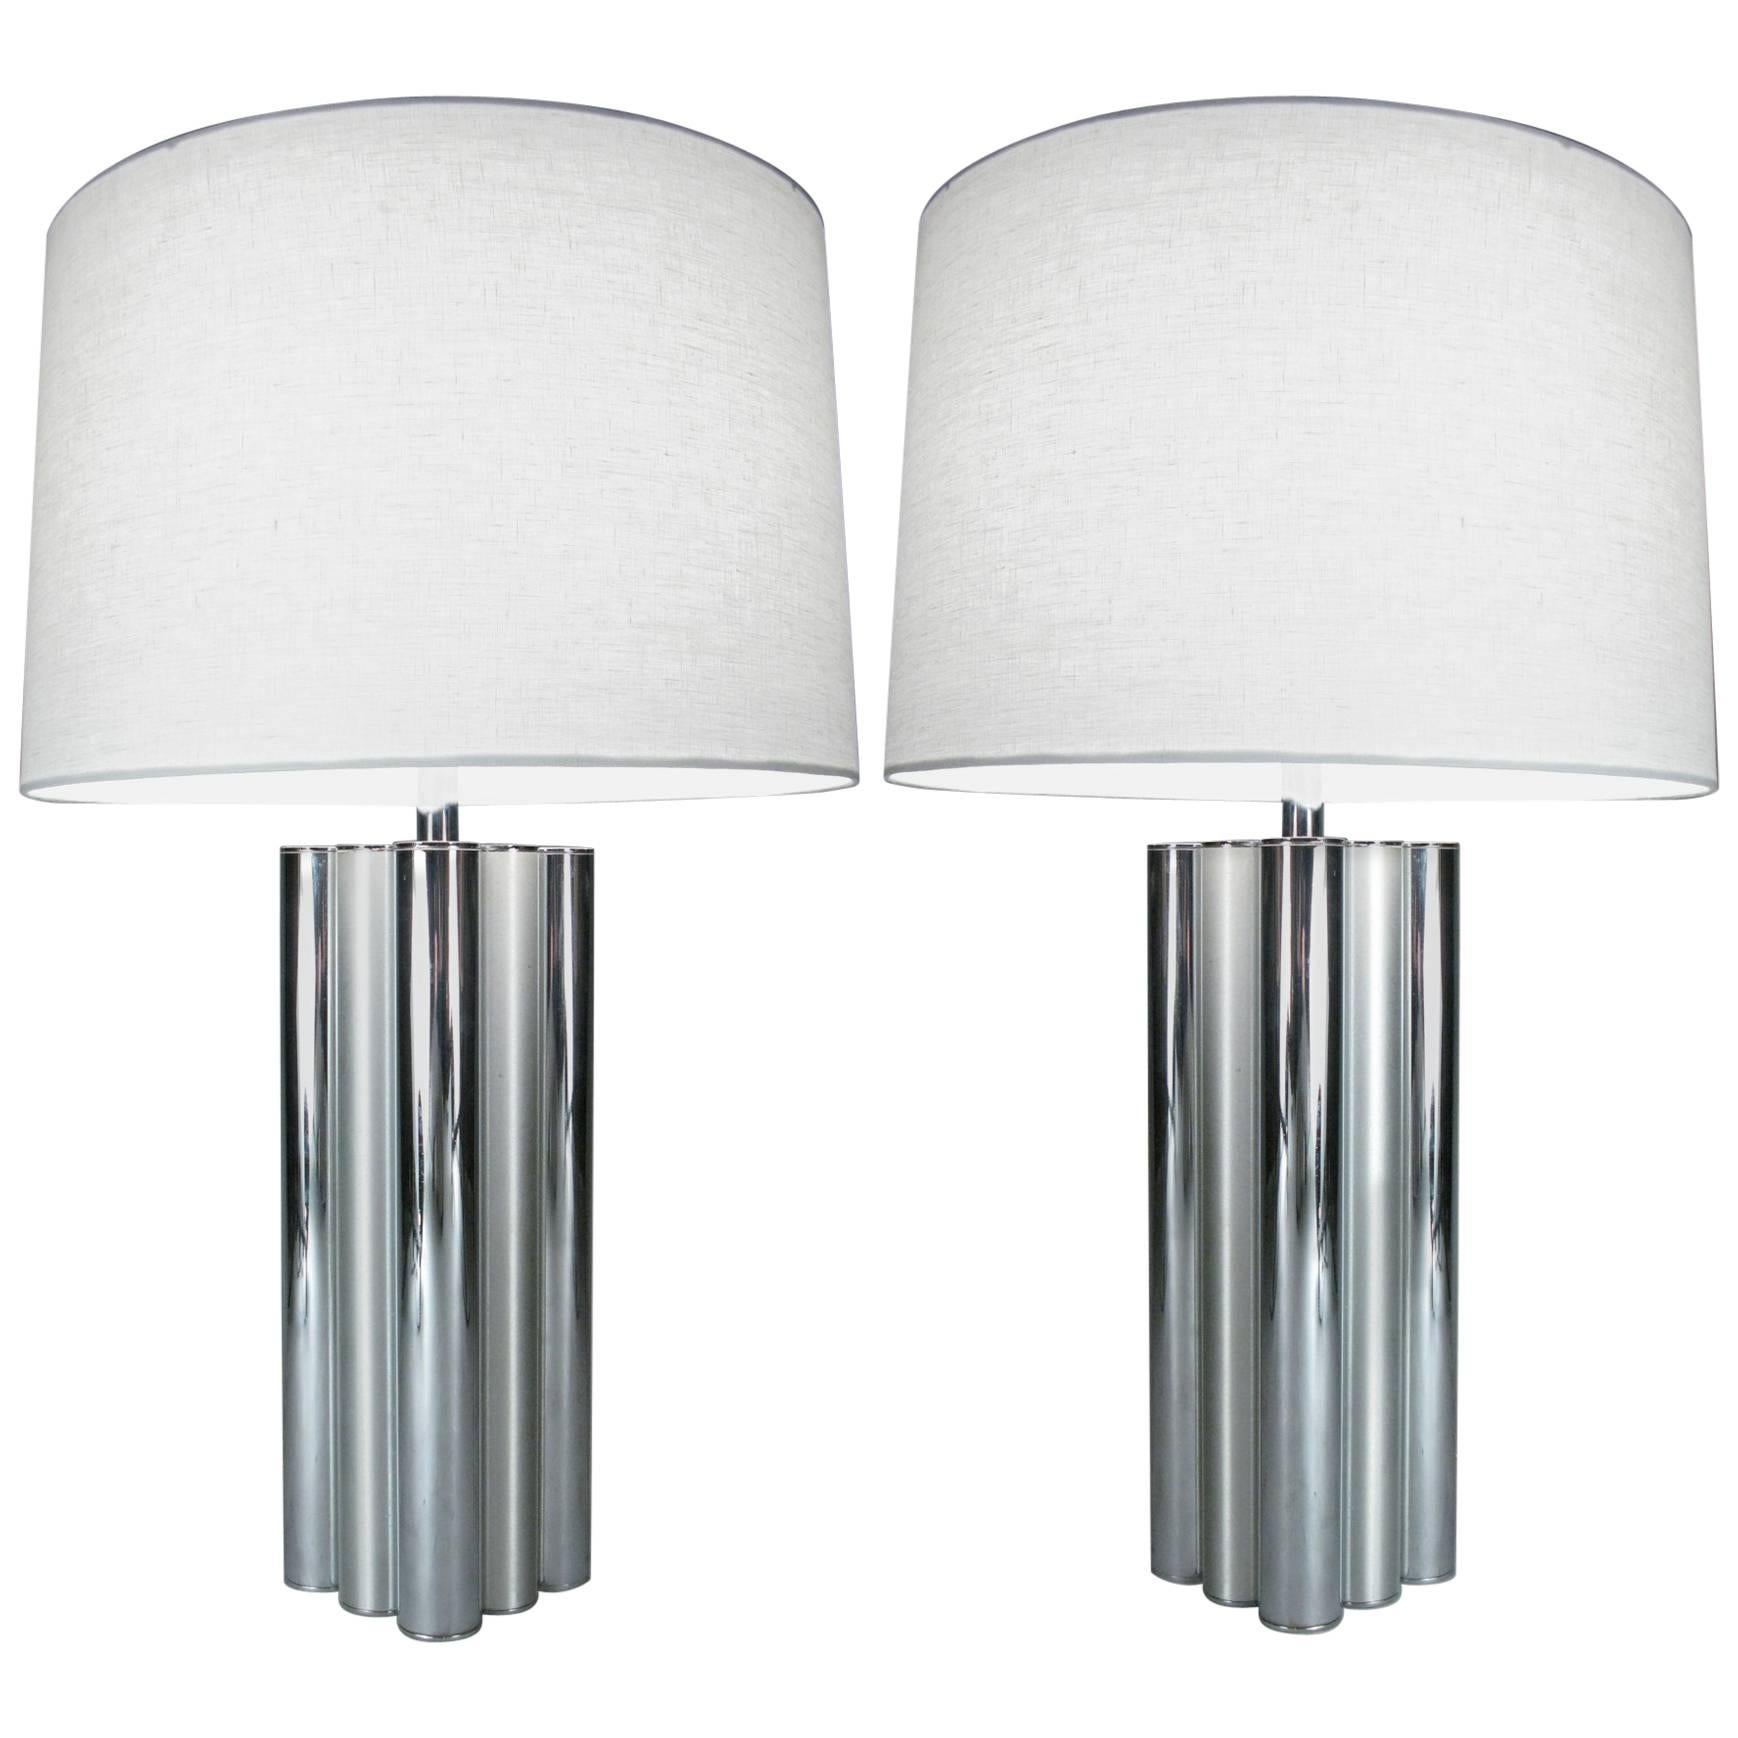 Pair of 1970s Chrome and Brushed Steel Tubular Lamps by Mutual Sunset